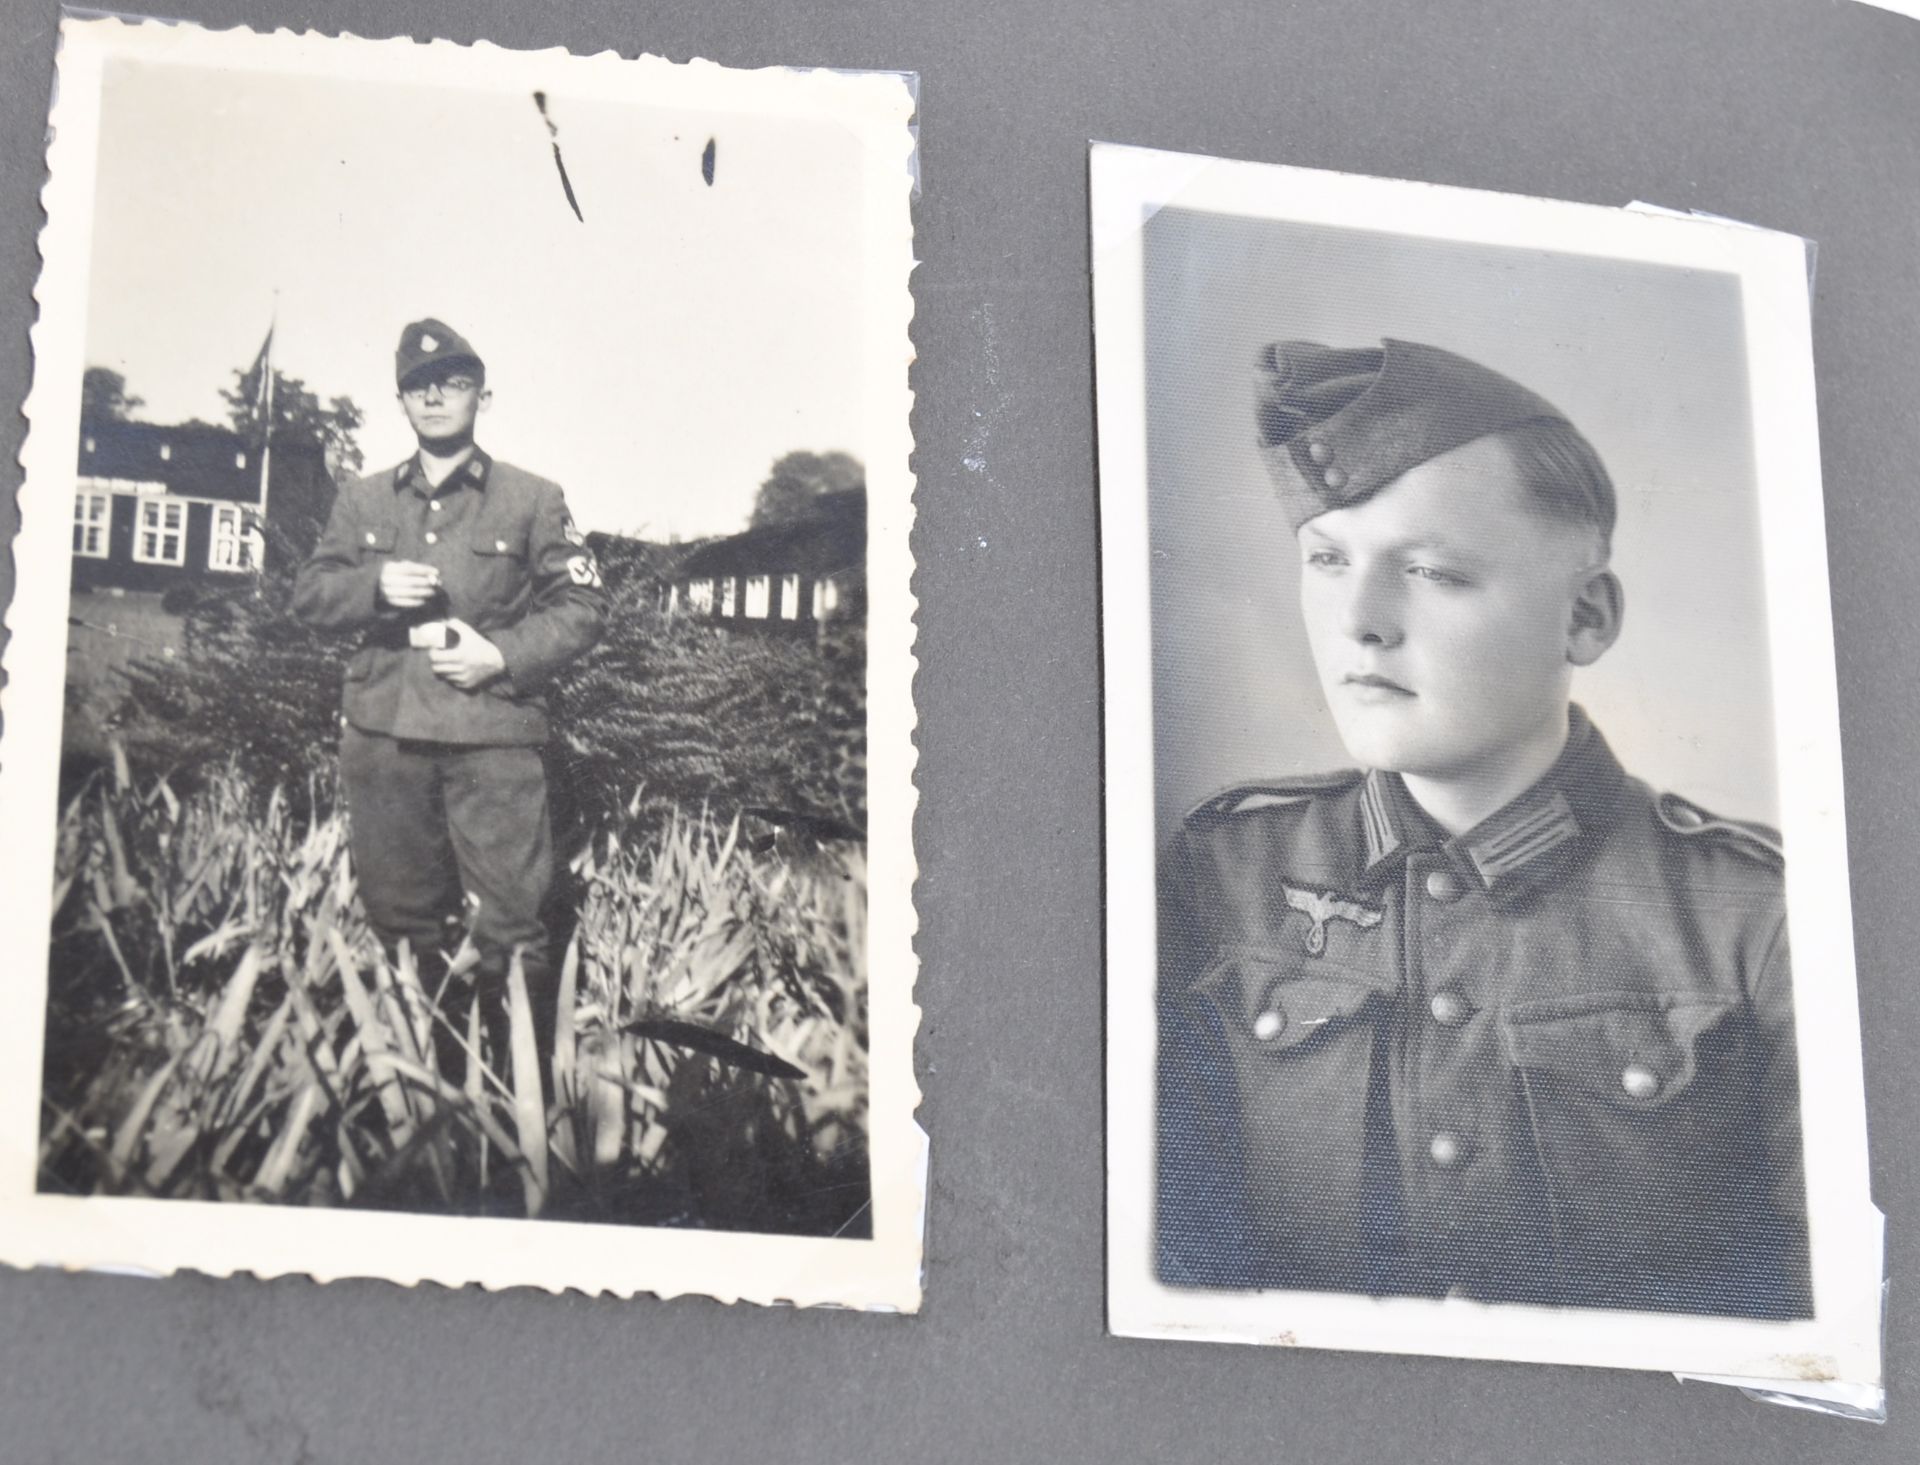 ORIGINAL WWII GERMAN SOLDIER'S PERSONAL PHOTOGRAPH ALBUM - Image 4 of 6